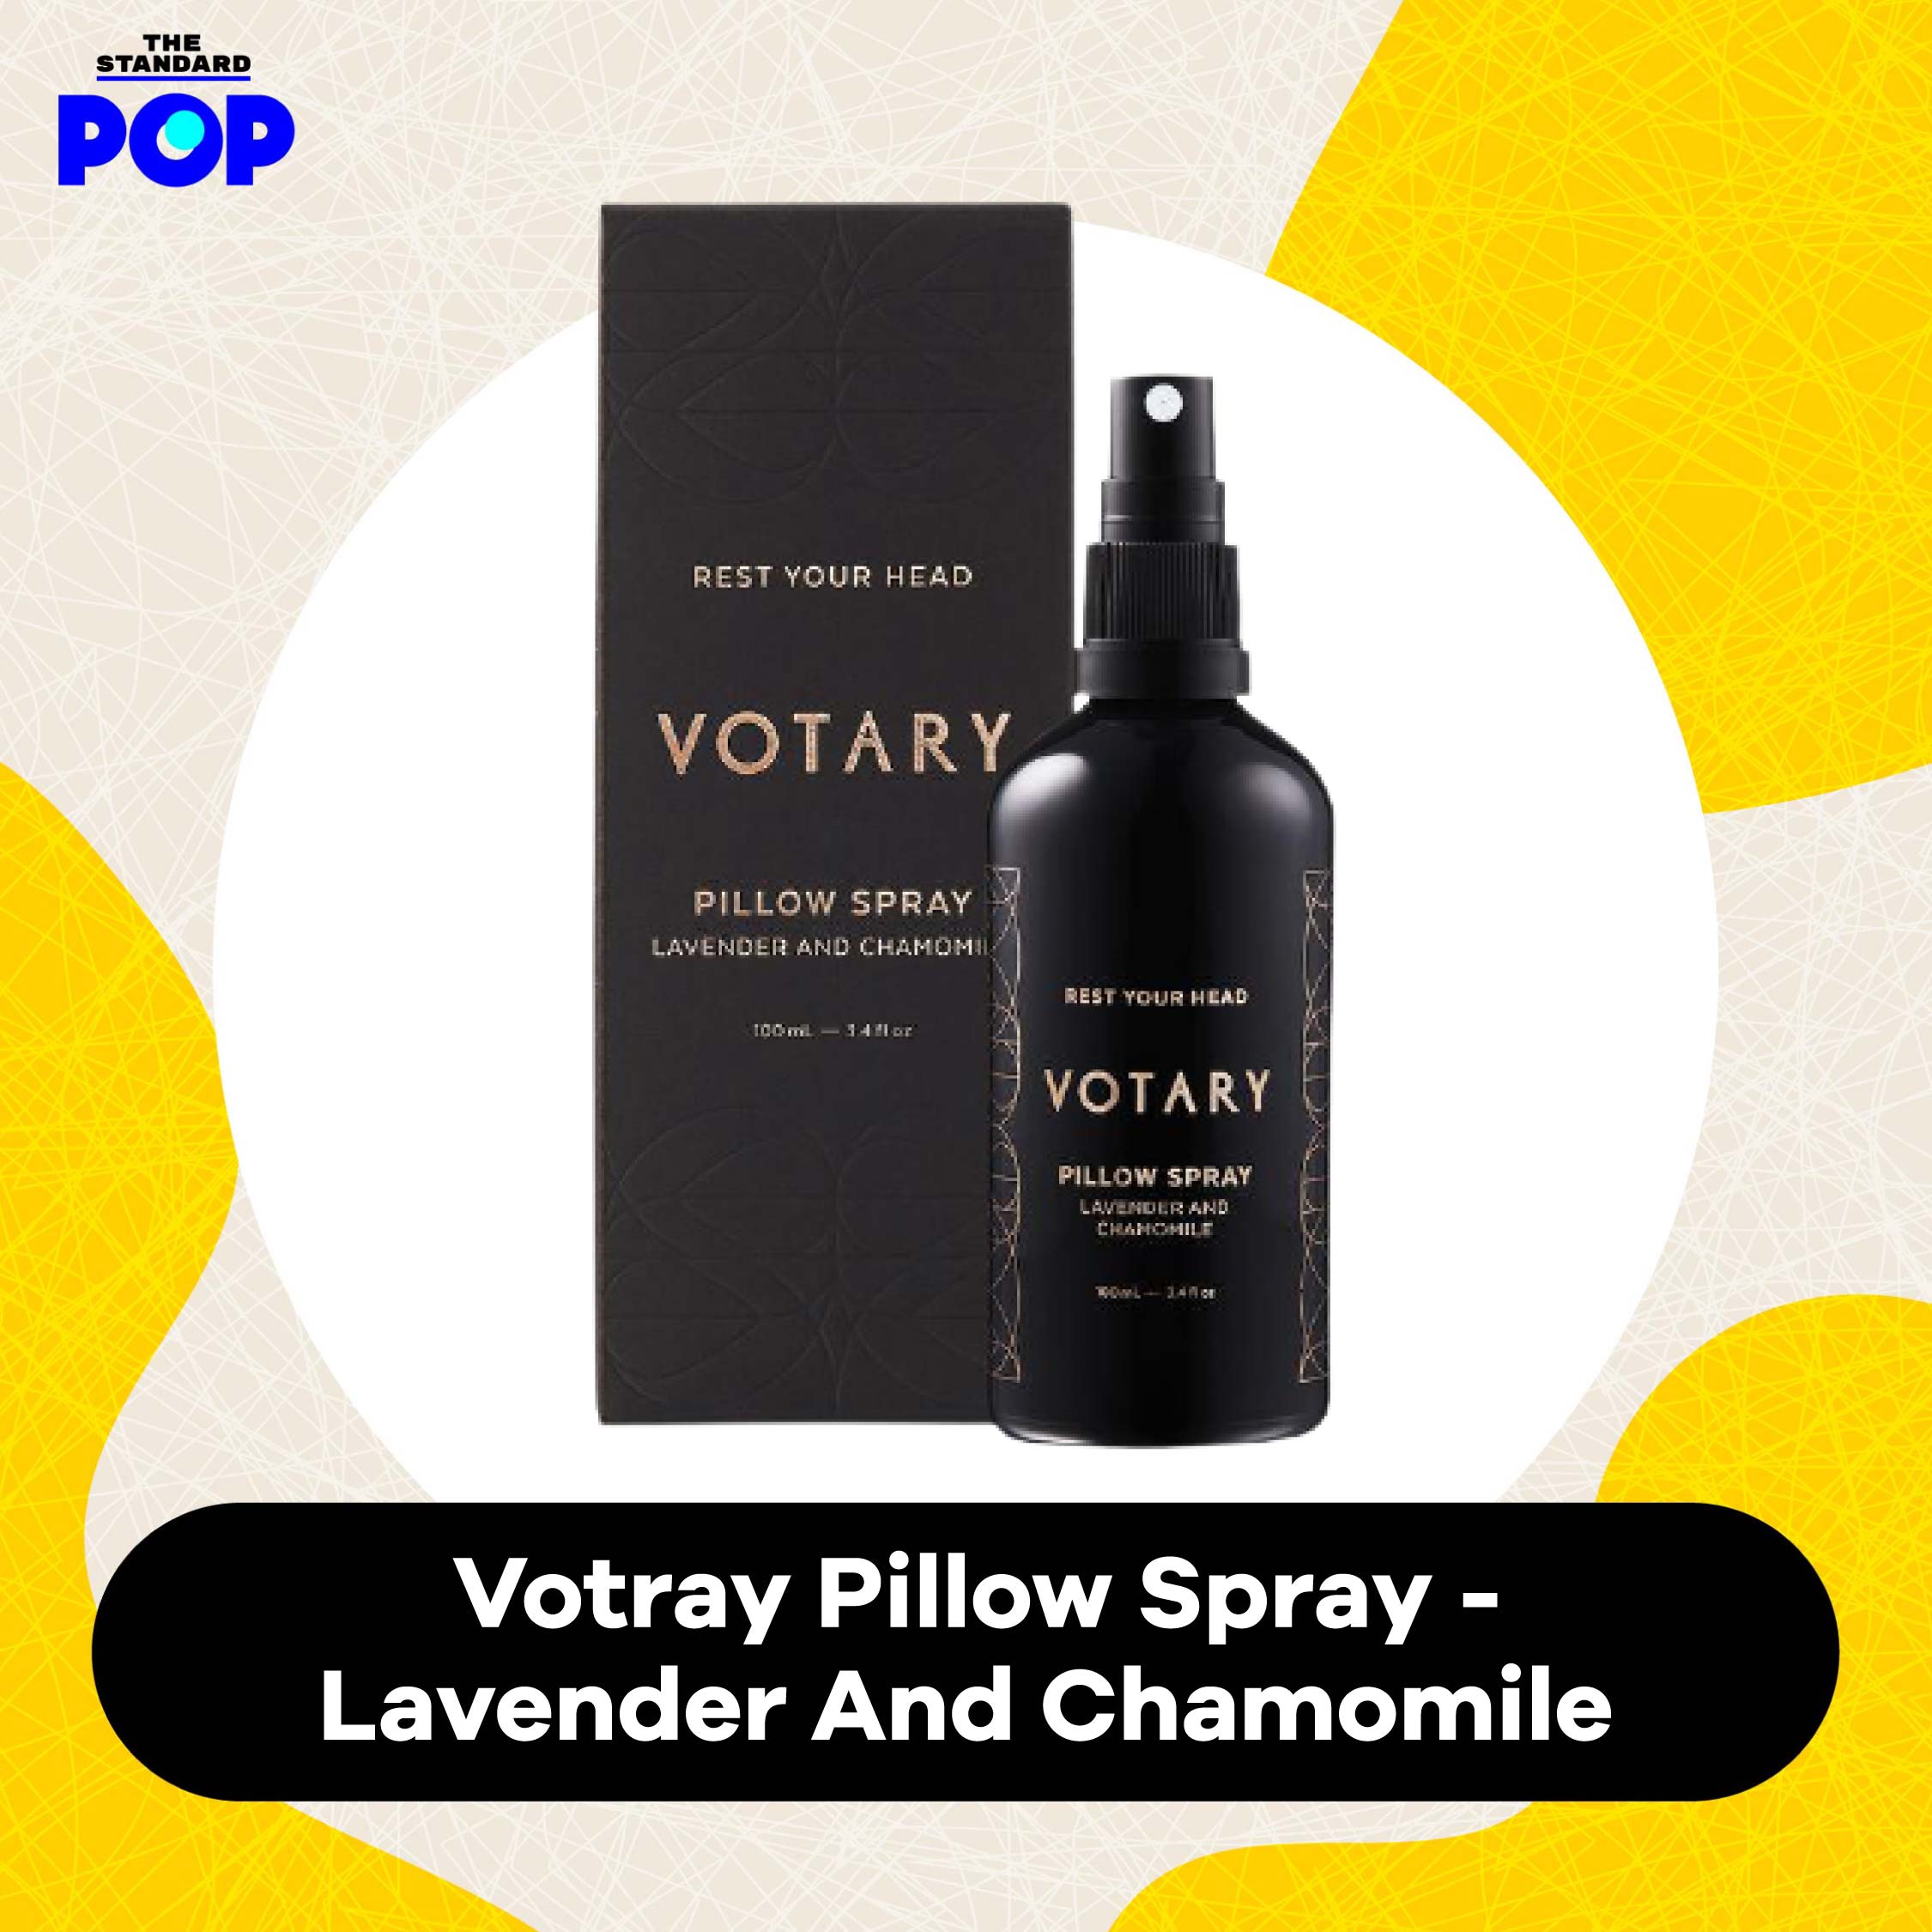 Votray Pillow Spray - Lavender And Chamomile